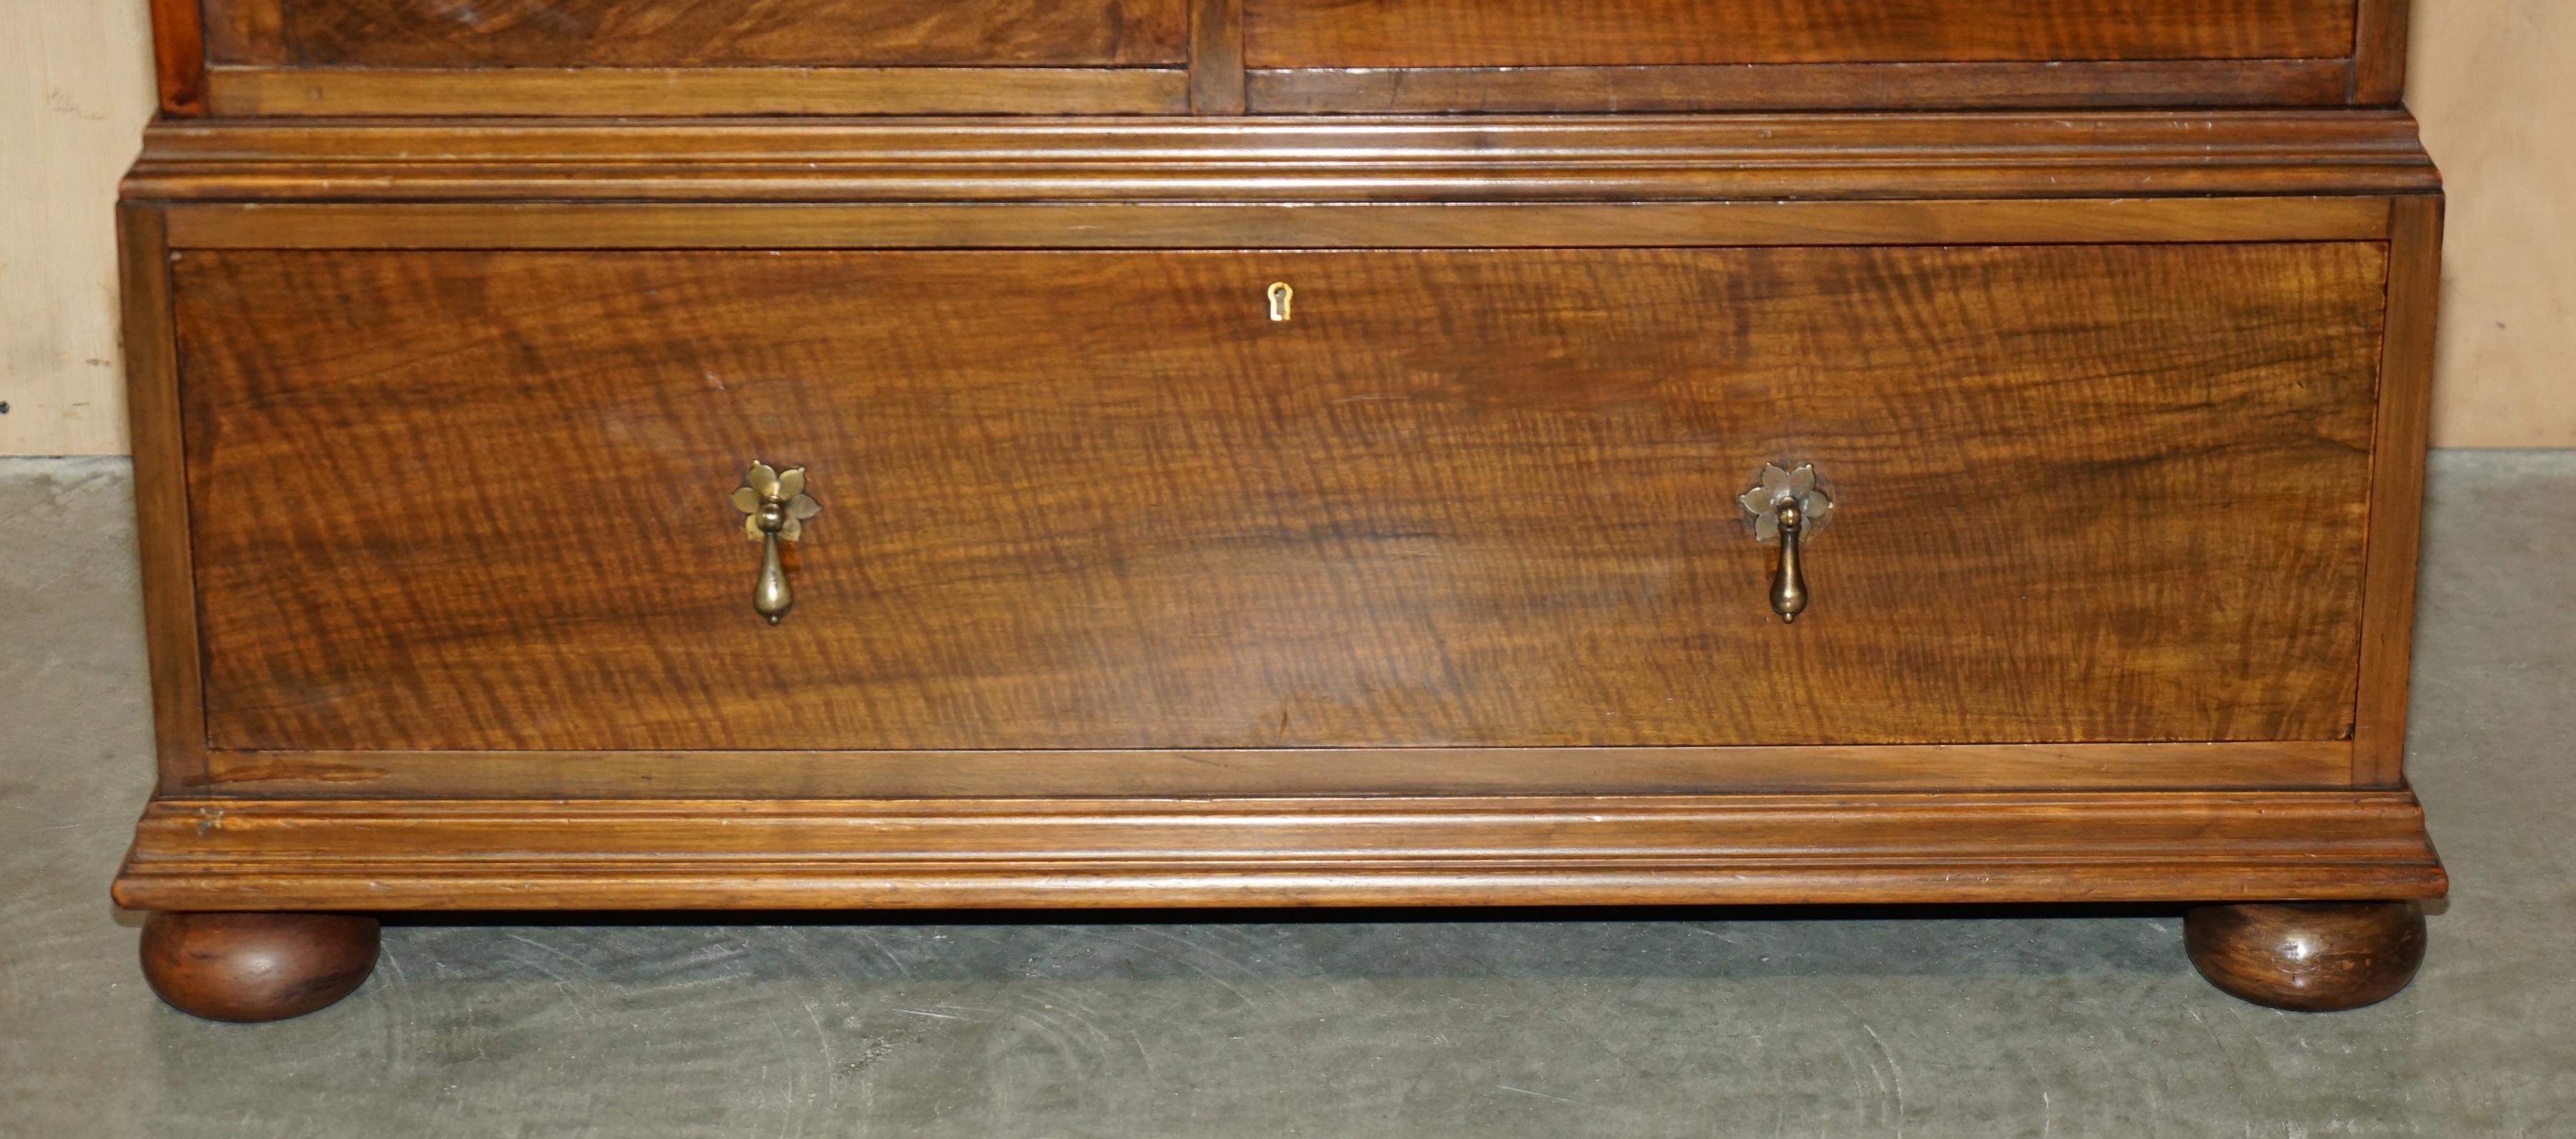 Hardwood FULLY RESTORED ANTiQUE LIBERTY & CO VICTORIAN WARDROBE COMPENDIUM WITH DRAWERS For Sale